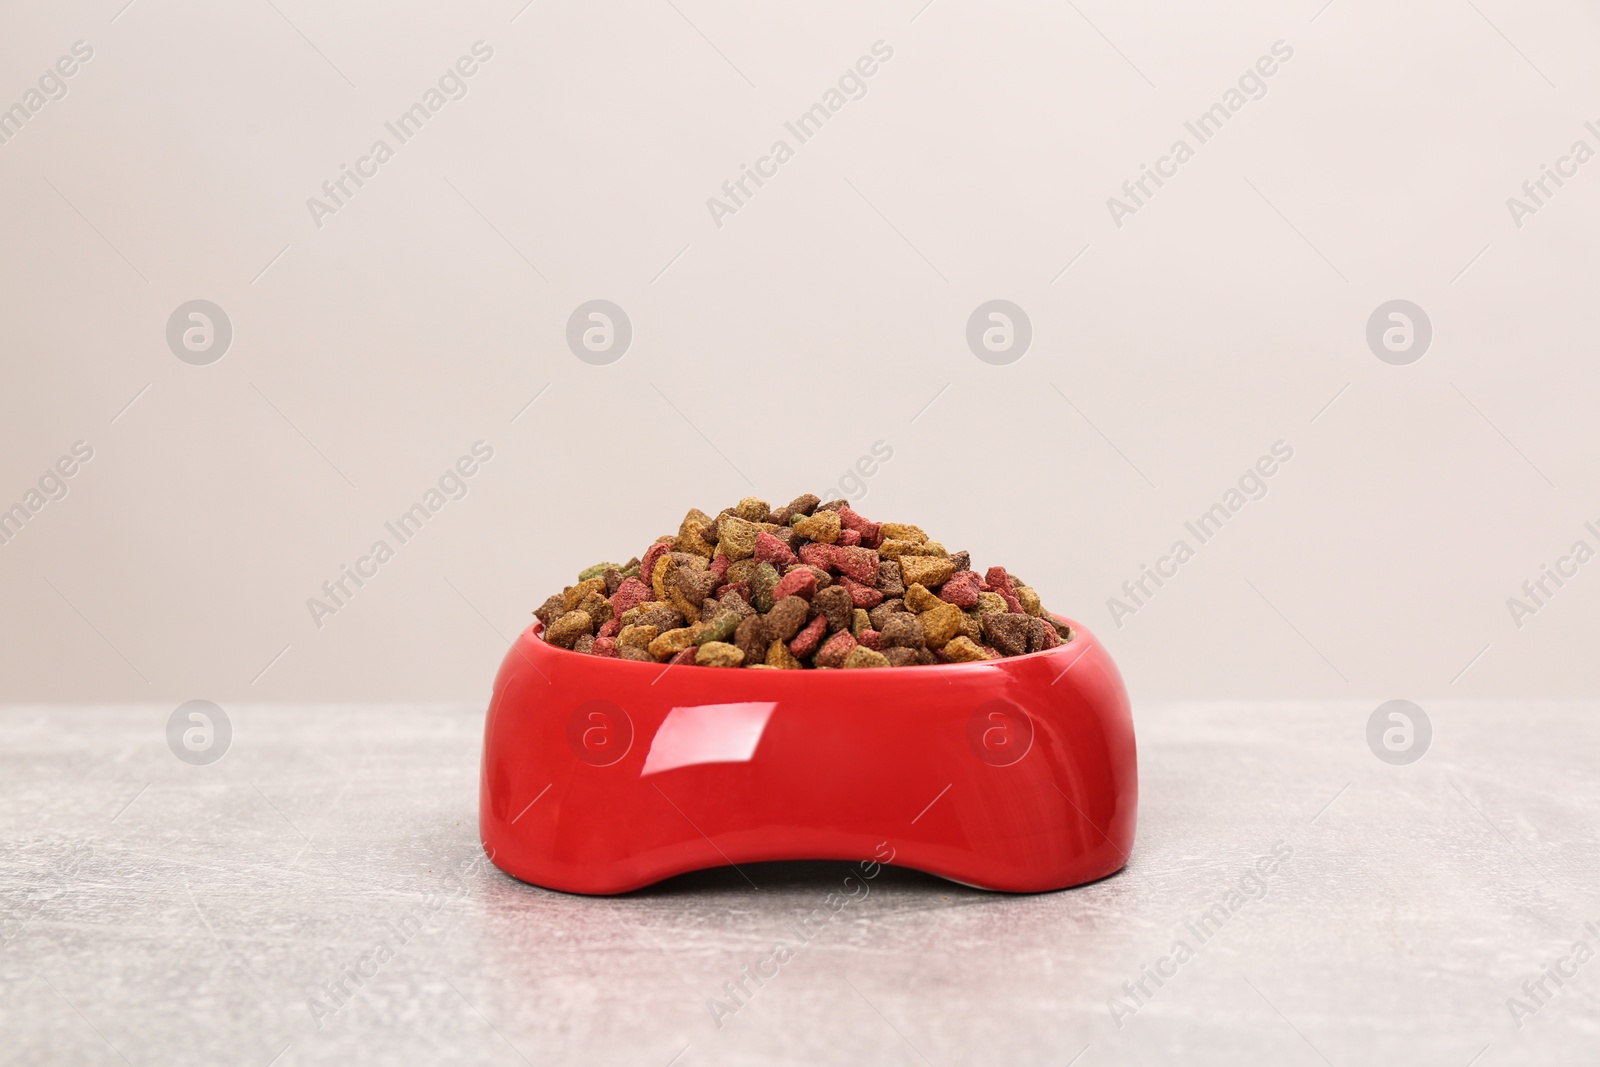 Photo of Dry cat food in red pet bowl on grey surface